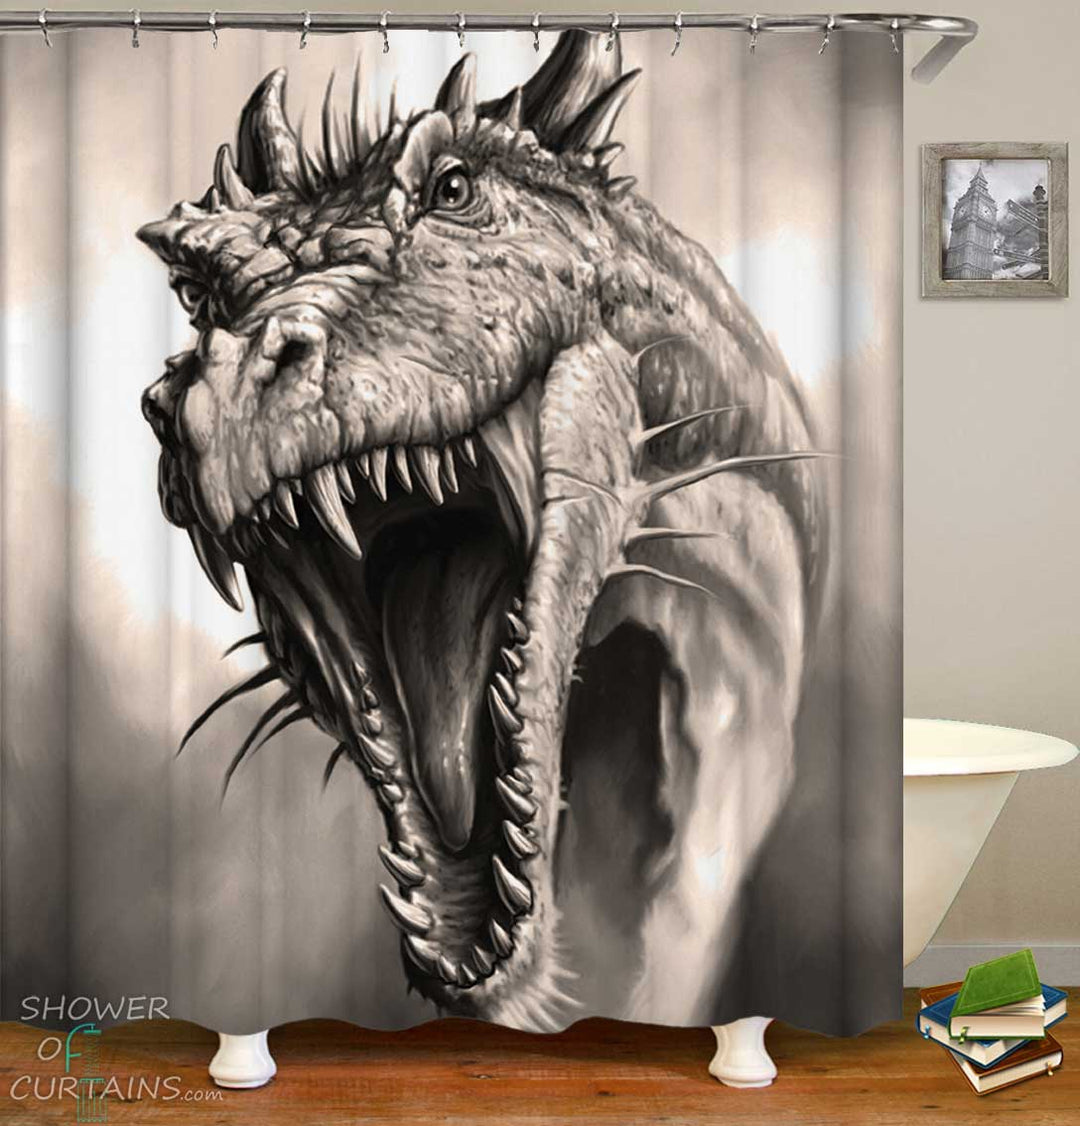 Shower Curtains with Black and White Dragon